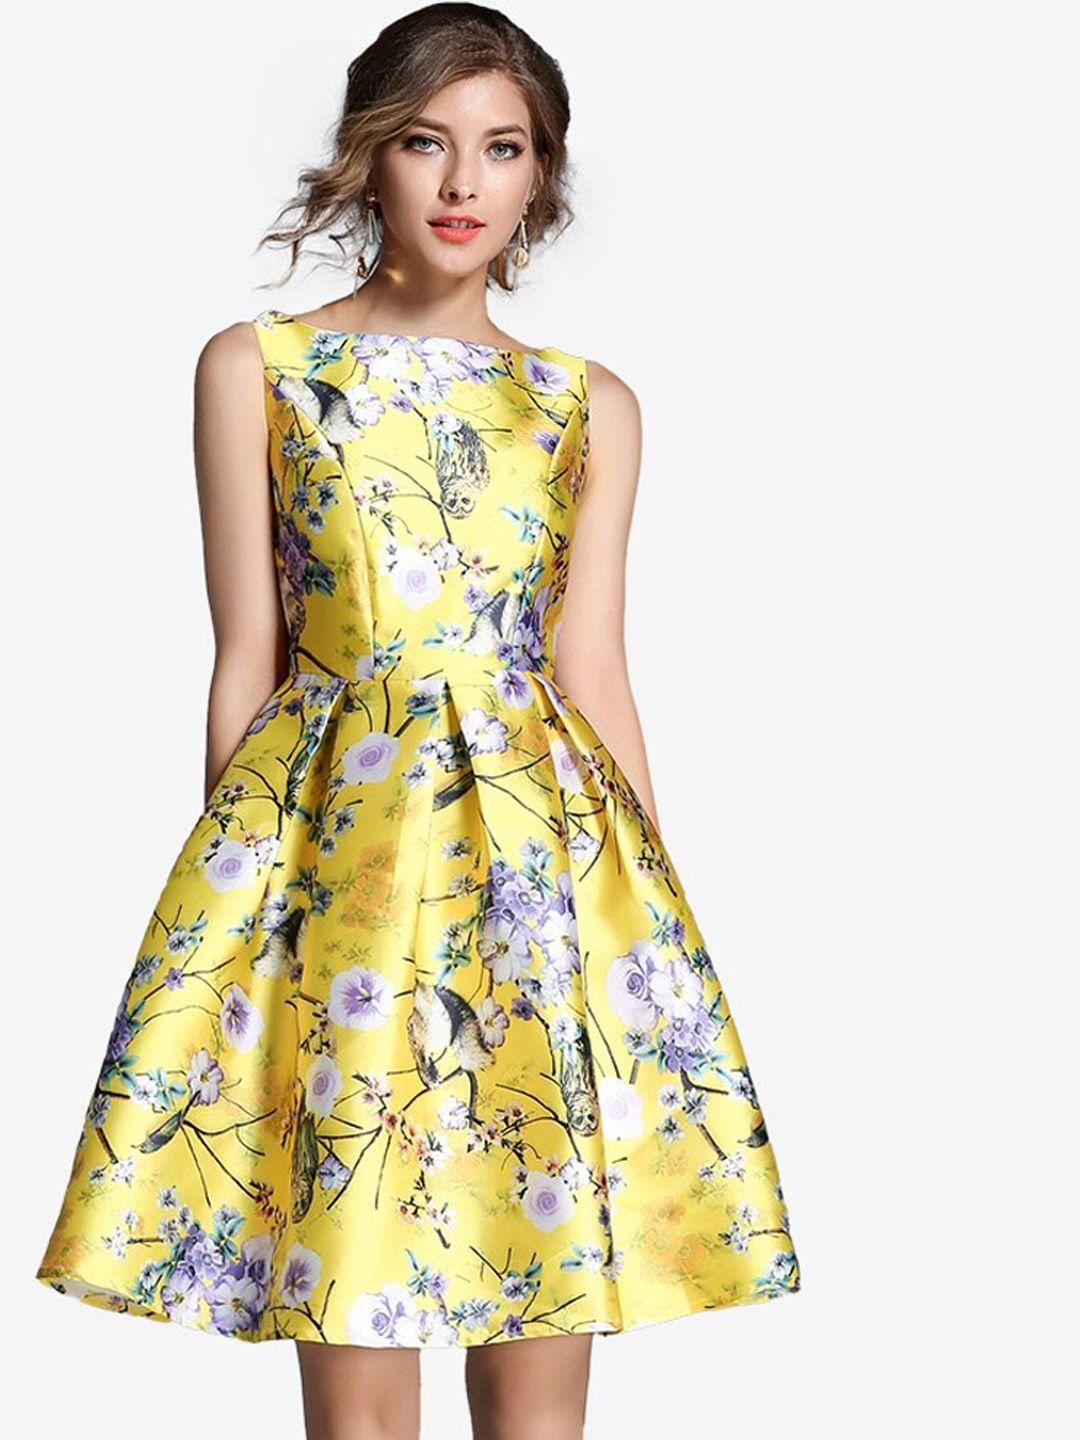 jc collection women yellow & purple floral printed fit & flare dress